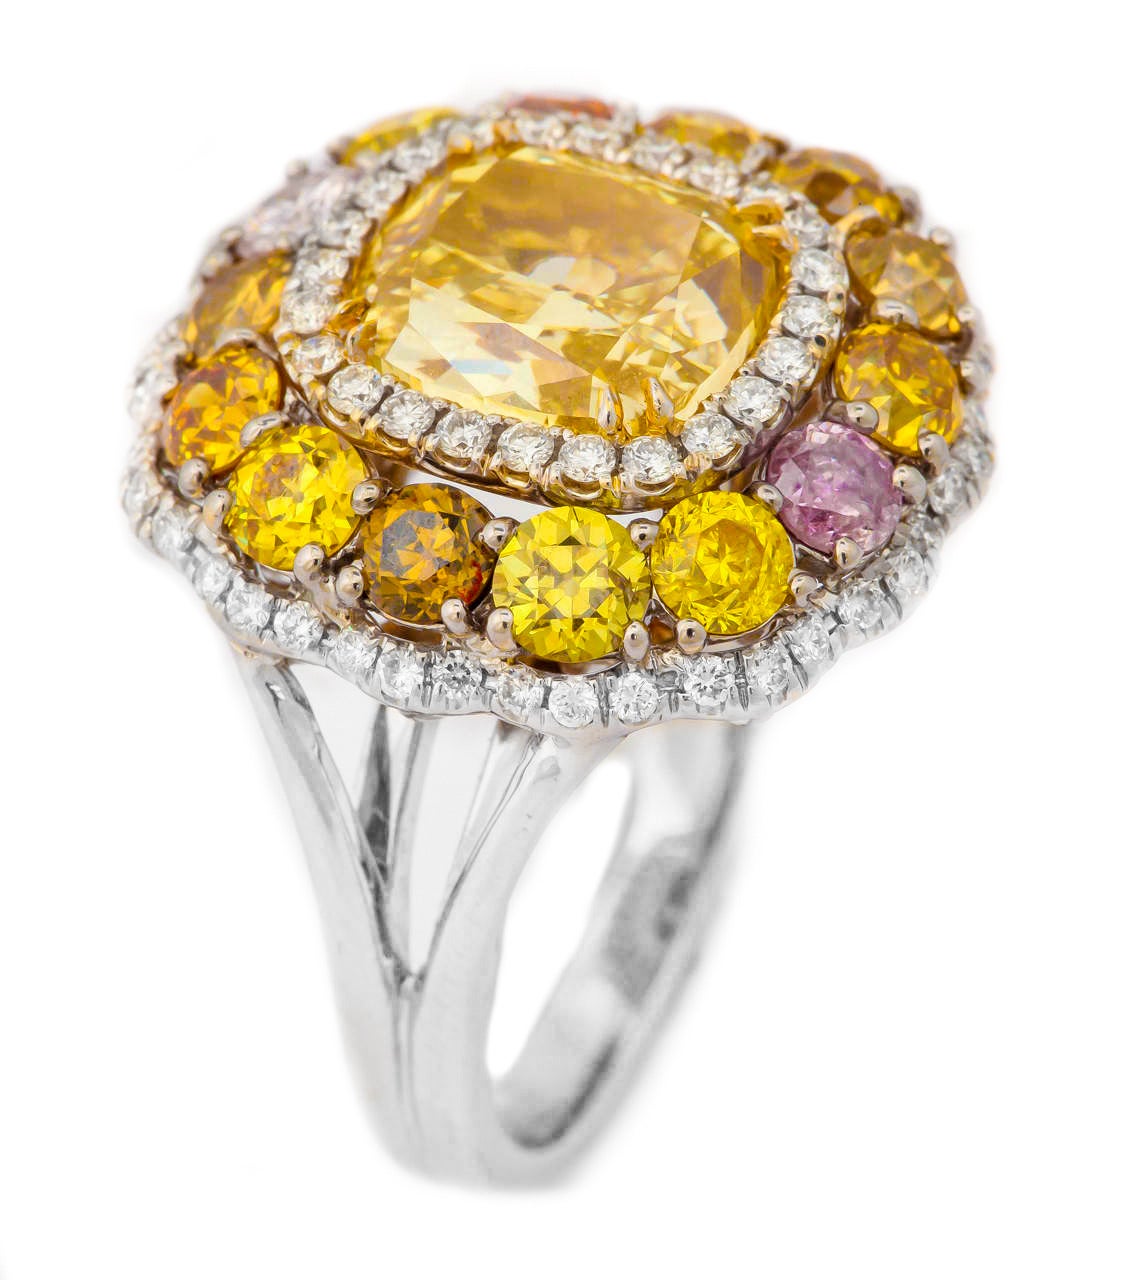 Stunning Cushion Cut diamond ring with center GIA Certified 3.02 Fancy Brownish Yellow, VS1 in Clarity, set with 4.12 Carats of Natural Fancy Color Diamonds, Natural Pink, Yellow, Cognac, white and orange diamonds. 

All round brilliant cut